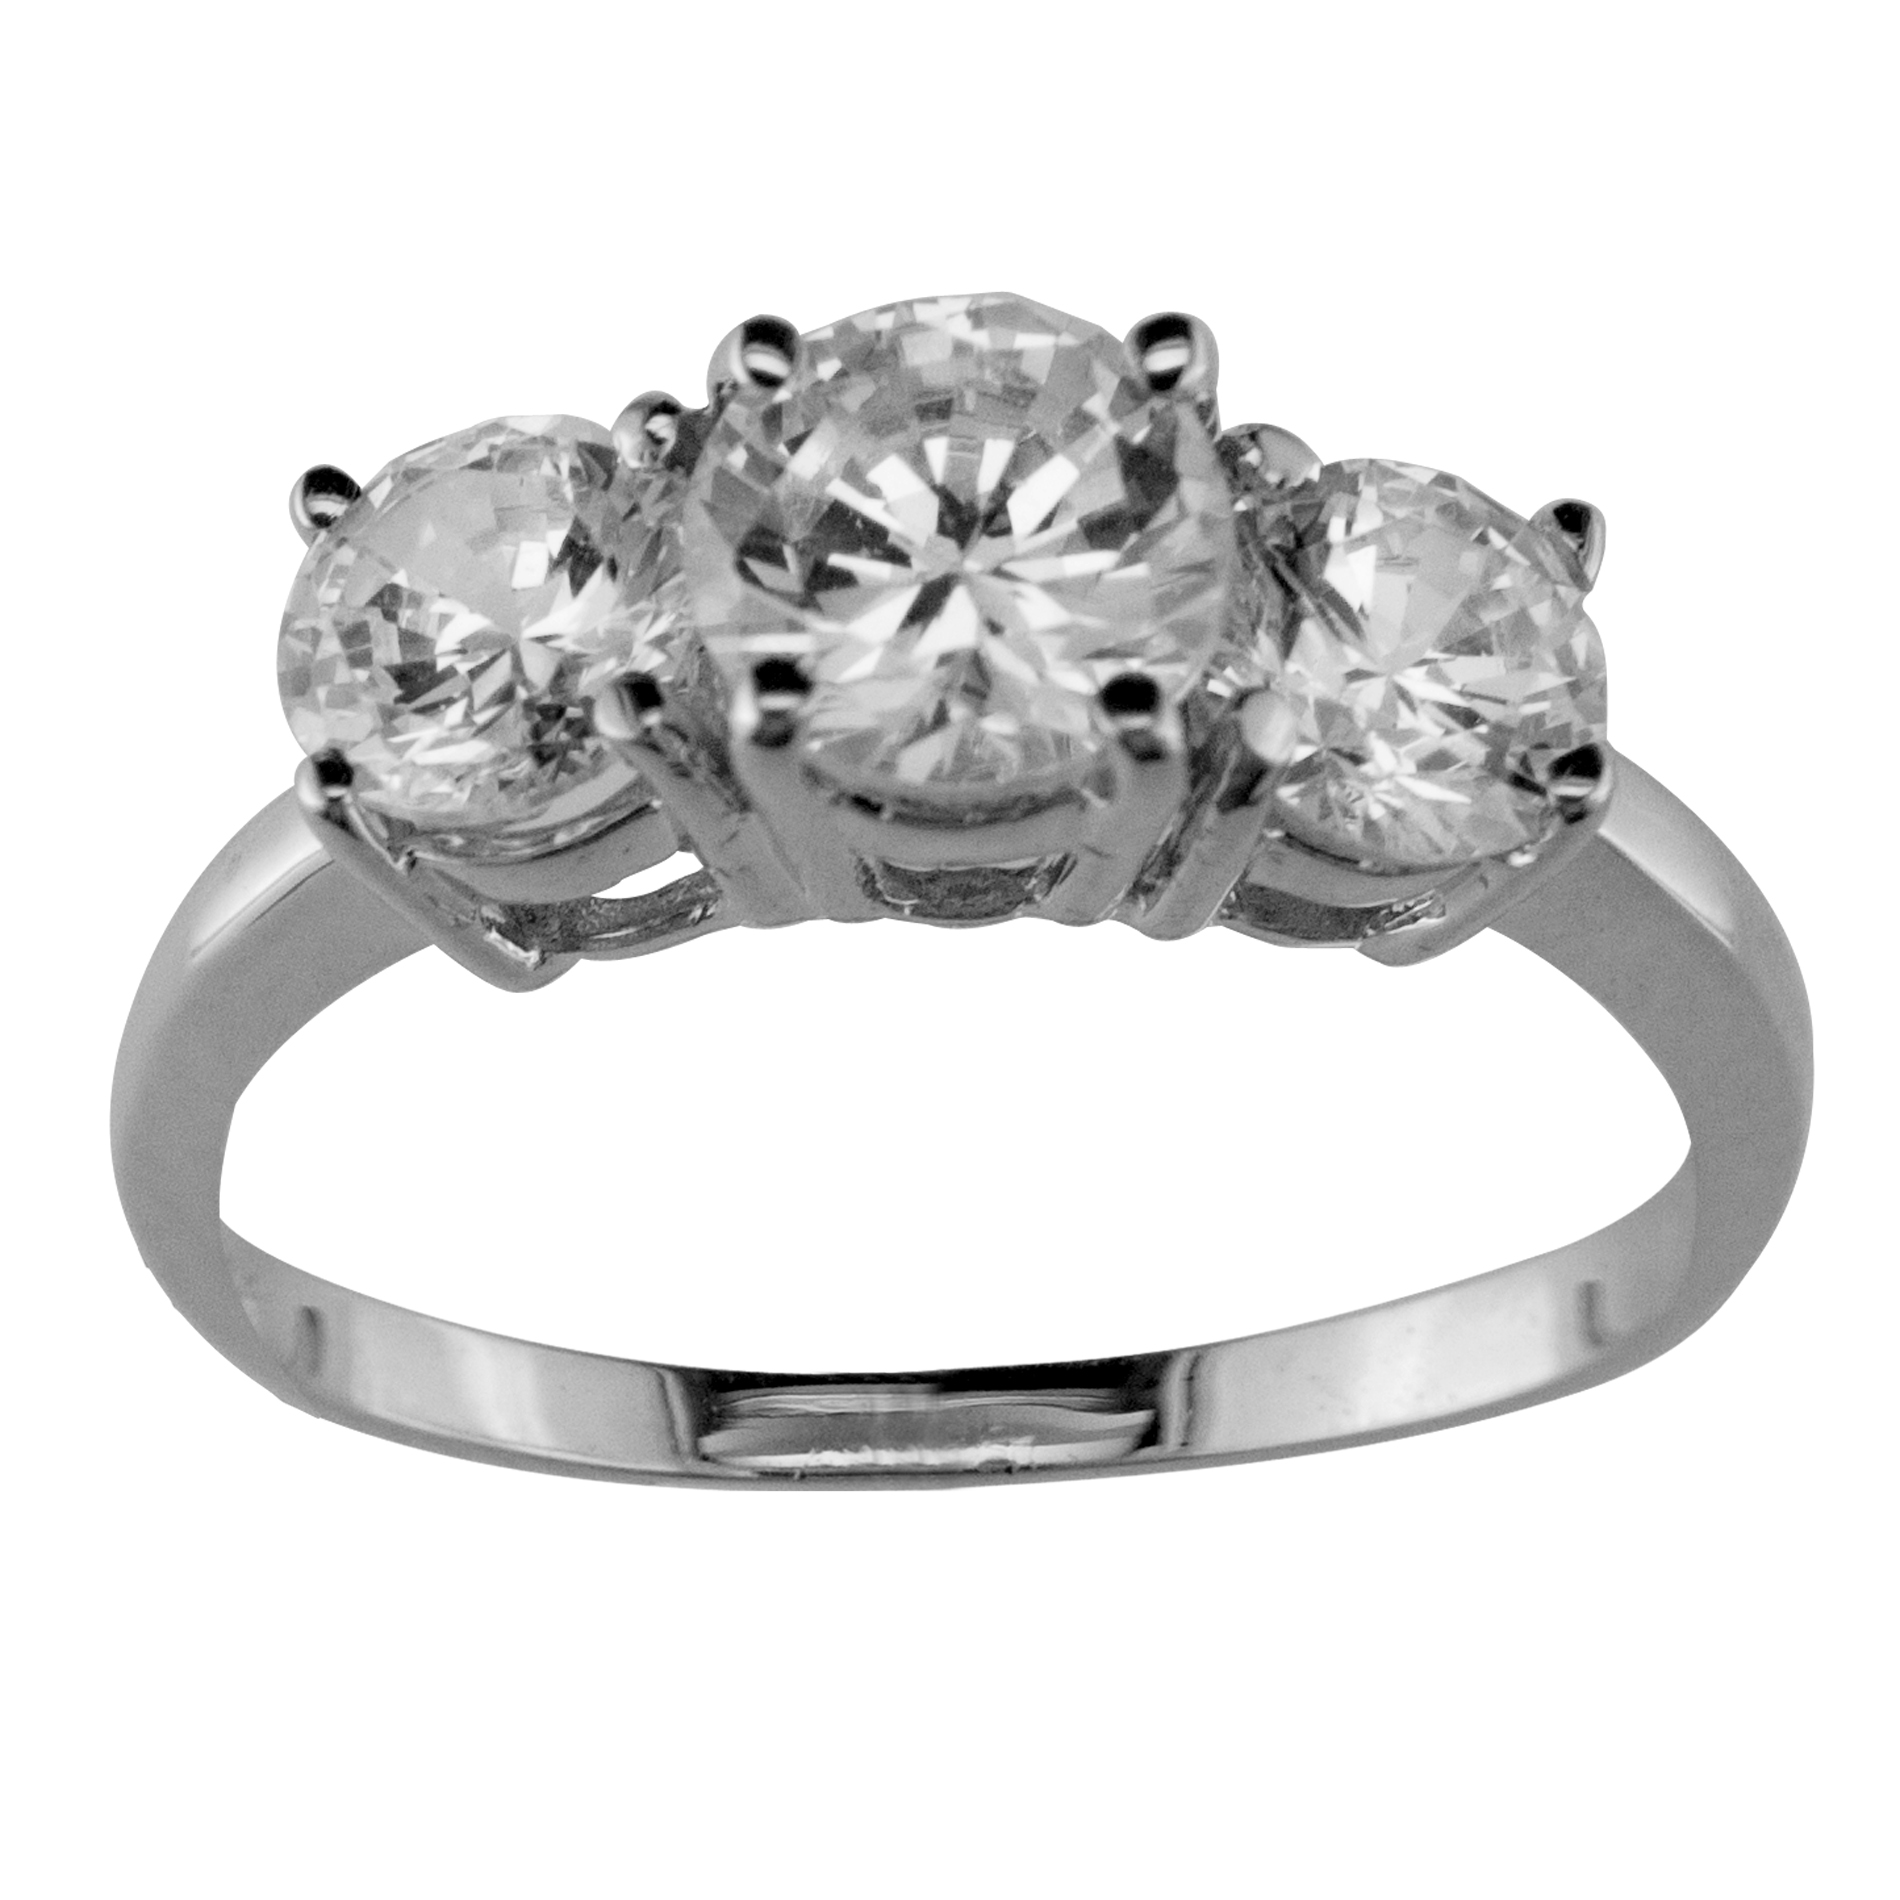 3 Stone Cubic Zirconia Ring in 10K White Gold